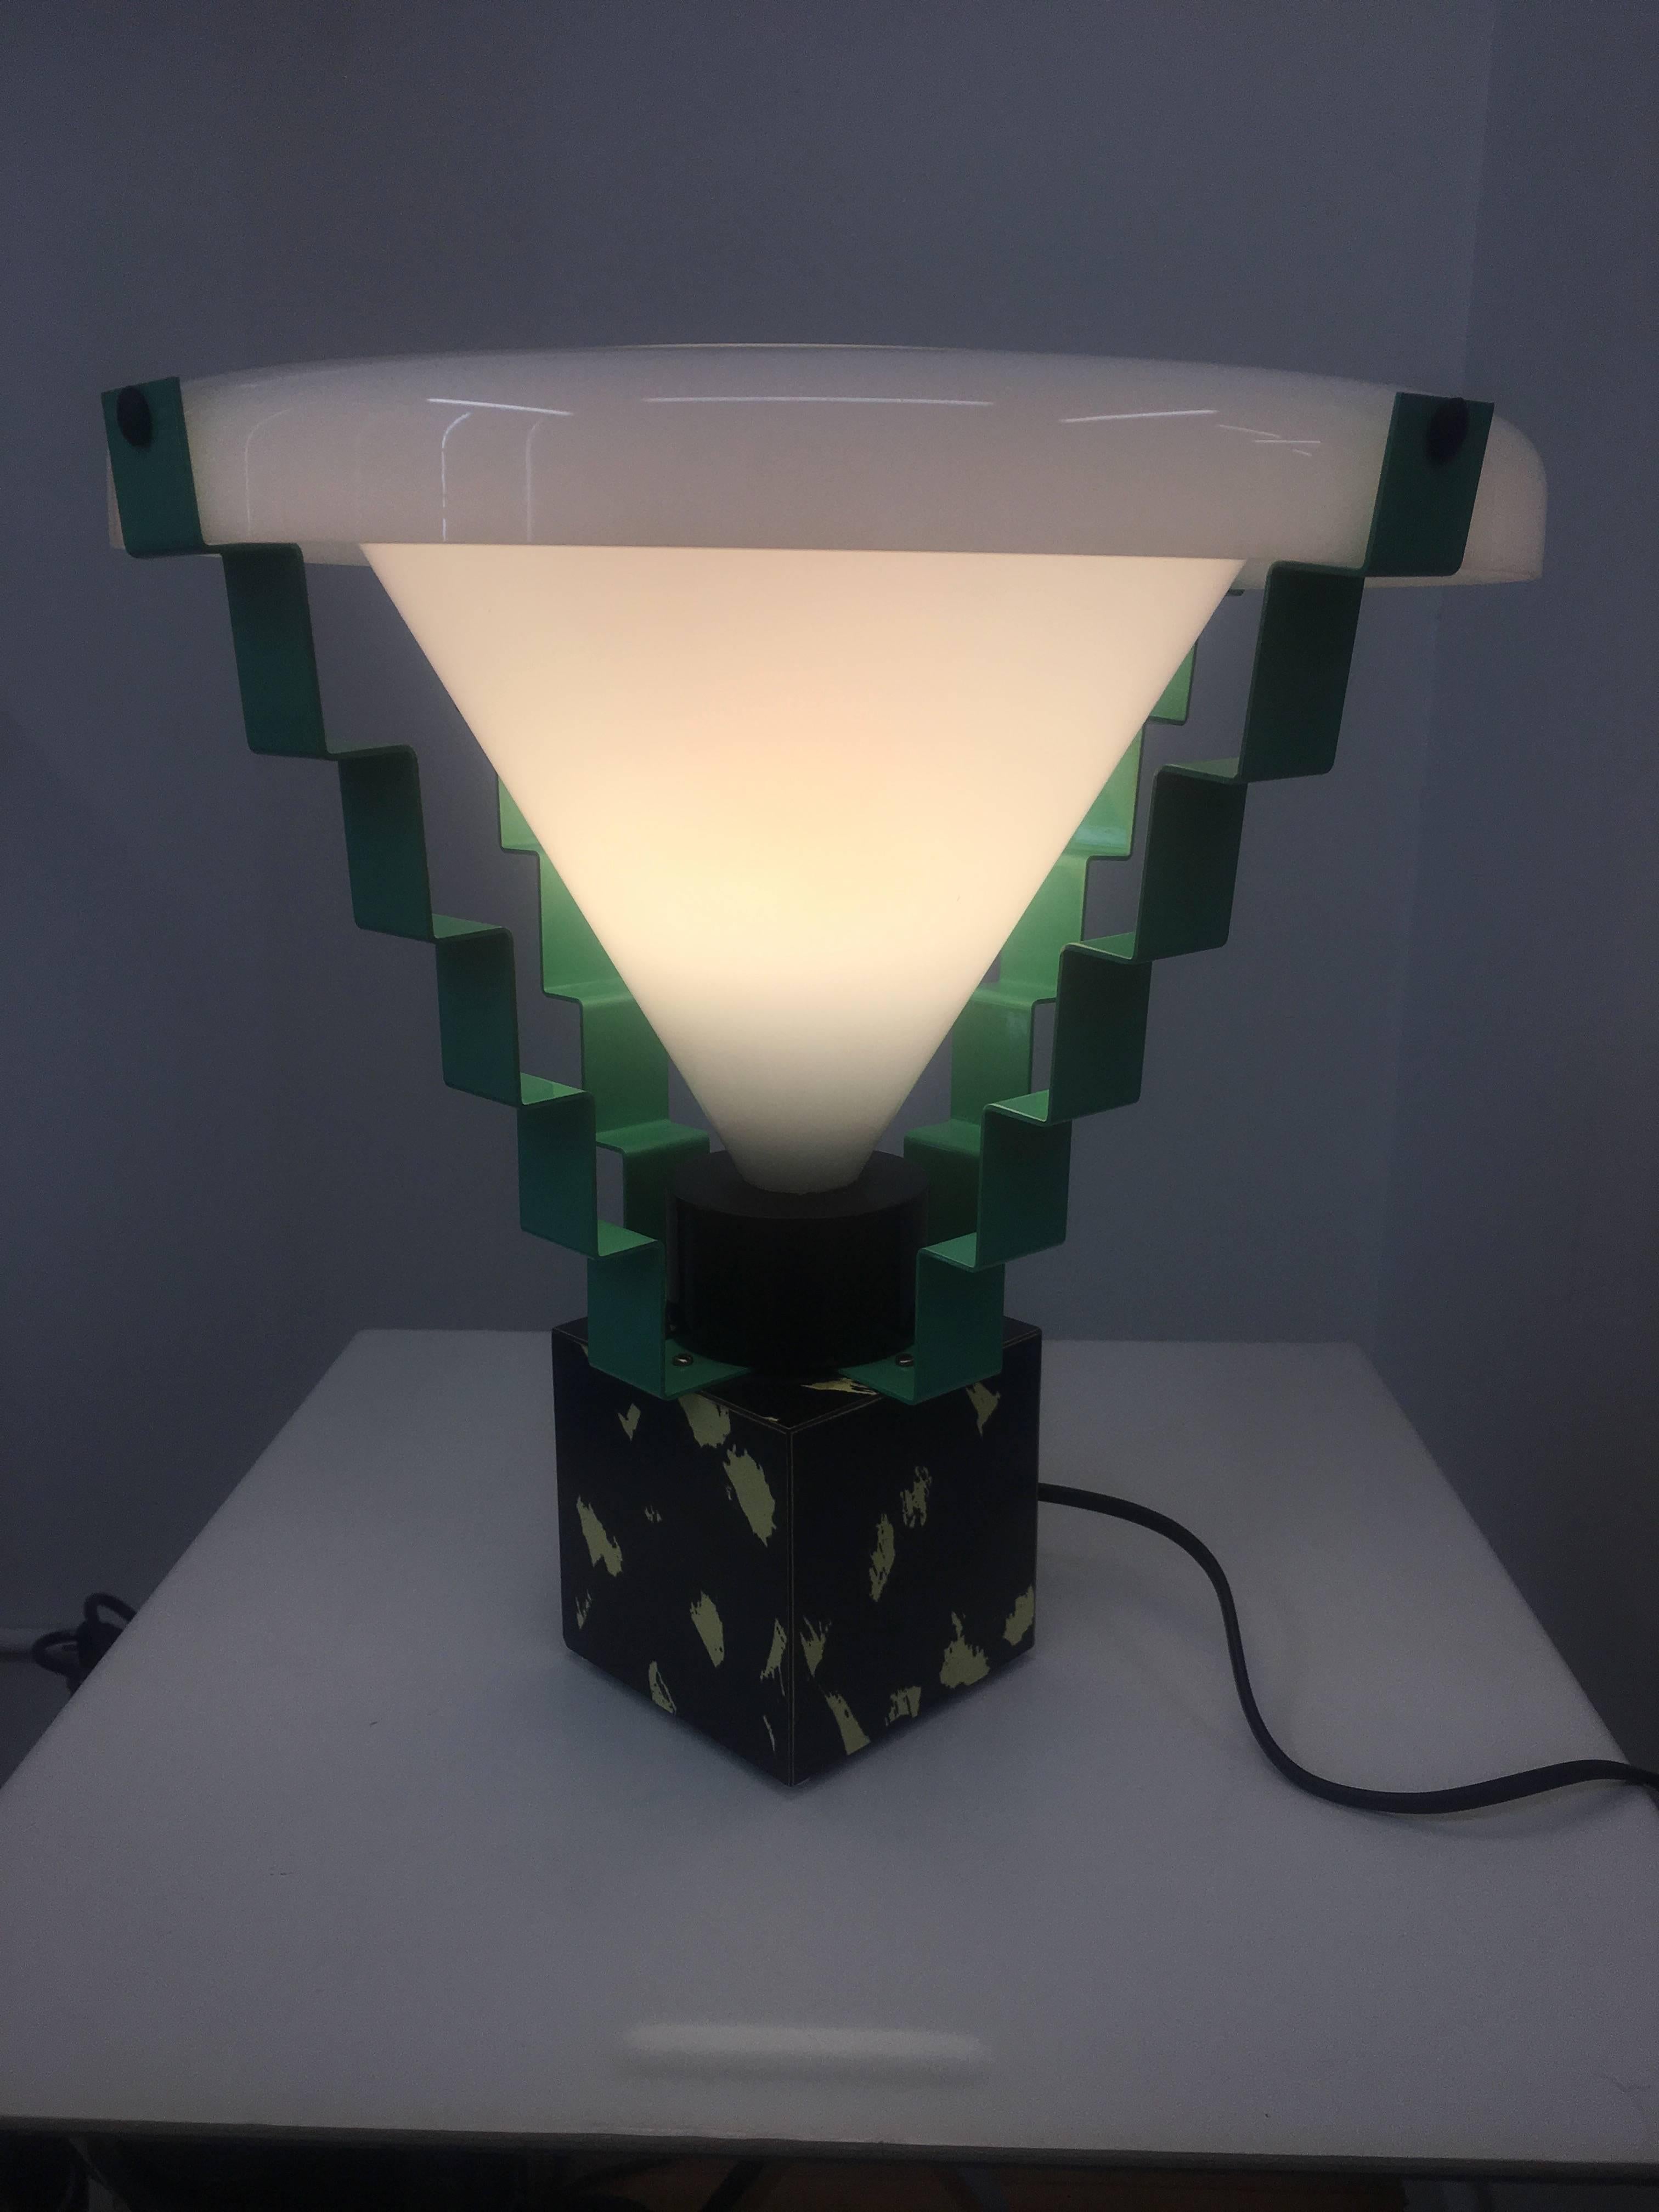 Rare table lamp designed by George Sowden and part of the 